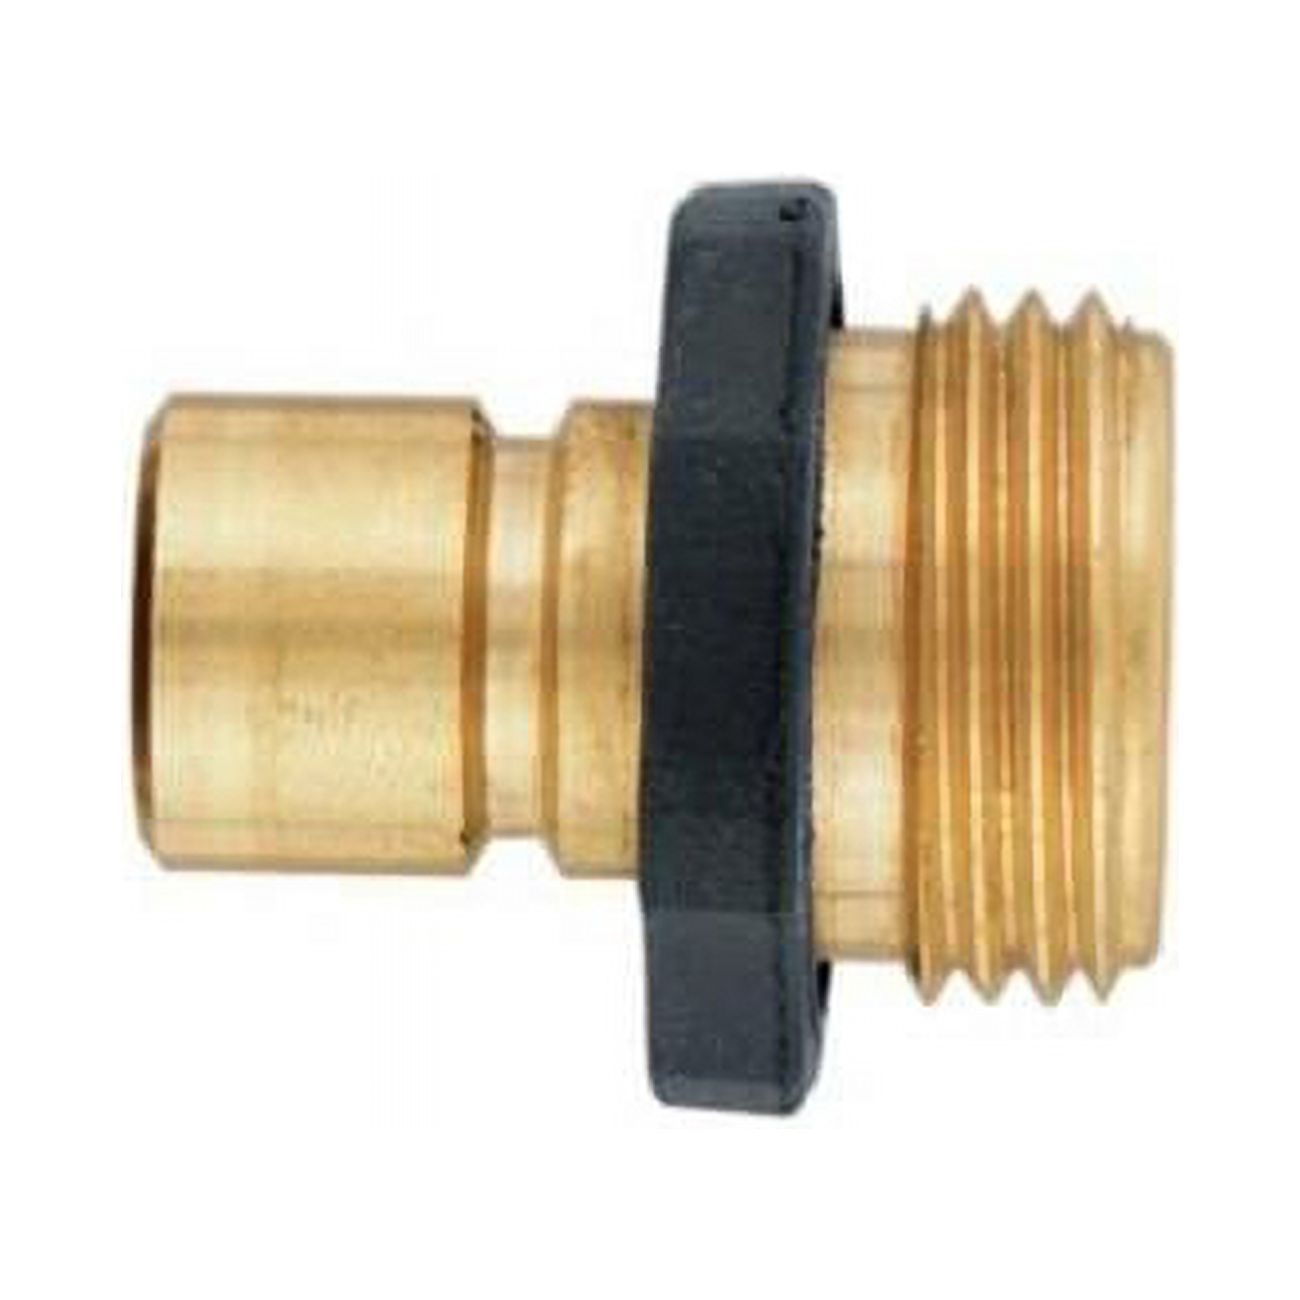 Orbit Irrigation Products 117511972 58119N Brass Male Quick Connect - image 1 of 3